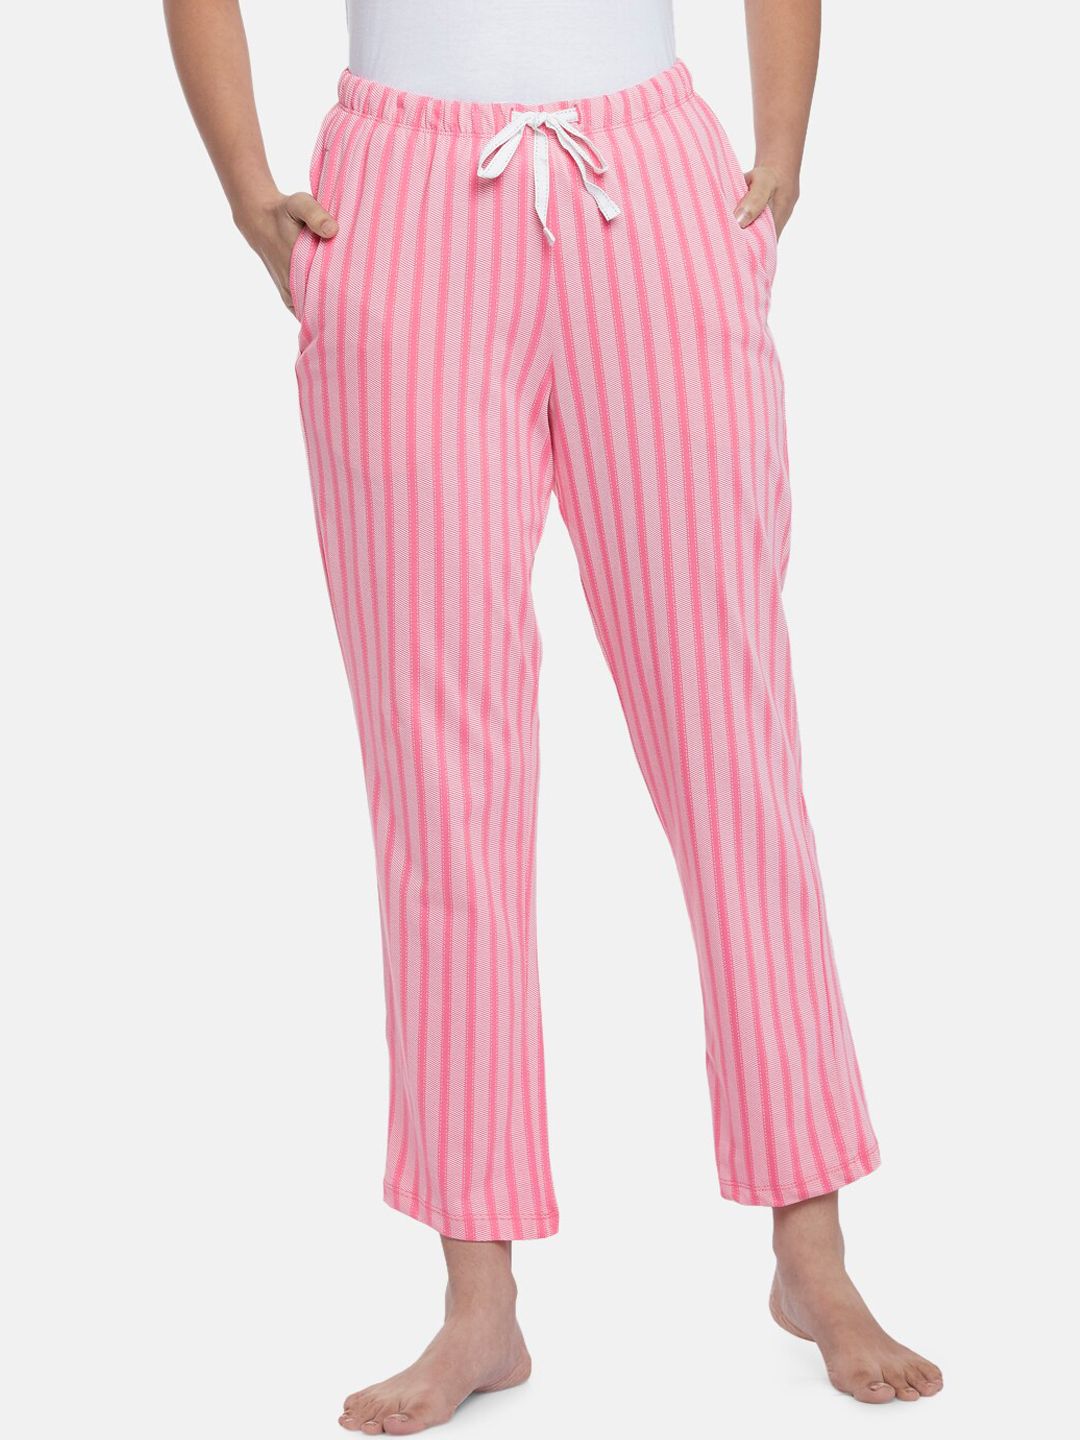 Dreamz by Pantaloons Pink Striped Lounge Pants Price in India